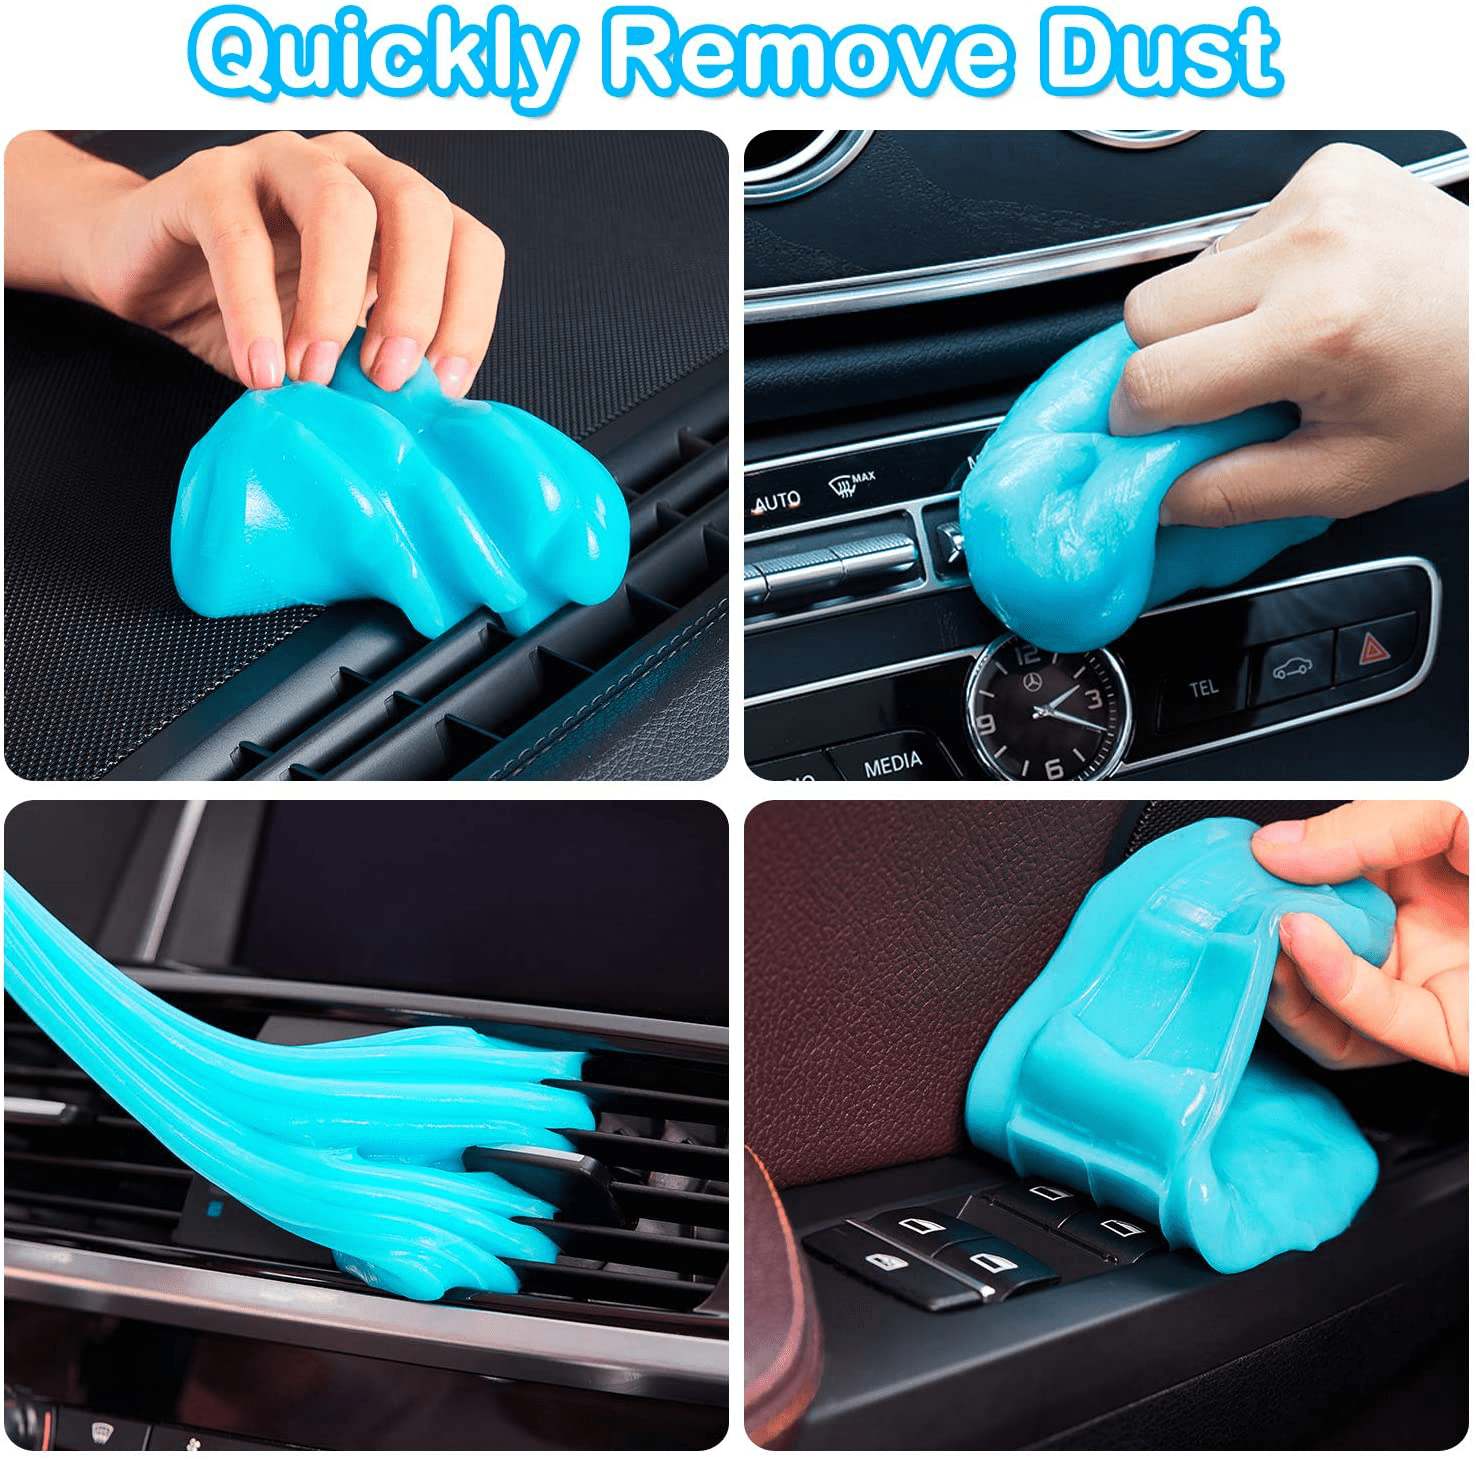 Car Cleaning Gel,2 Pack Cleaning Gel for Car Detail Tools,Car Crevice Cleaner,Universal Auto Dust Keyboard Cleaner Automotive Interior Cleaning Sticky Mud Detail Tools for Laptop,Car Vent,Office Home 